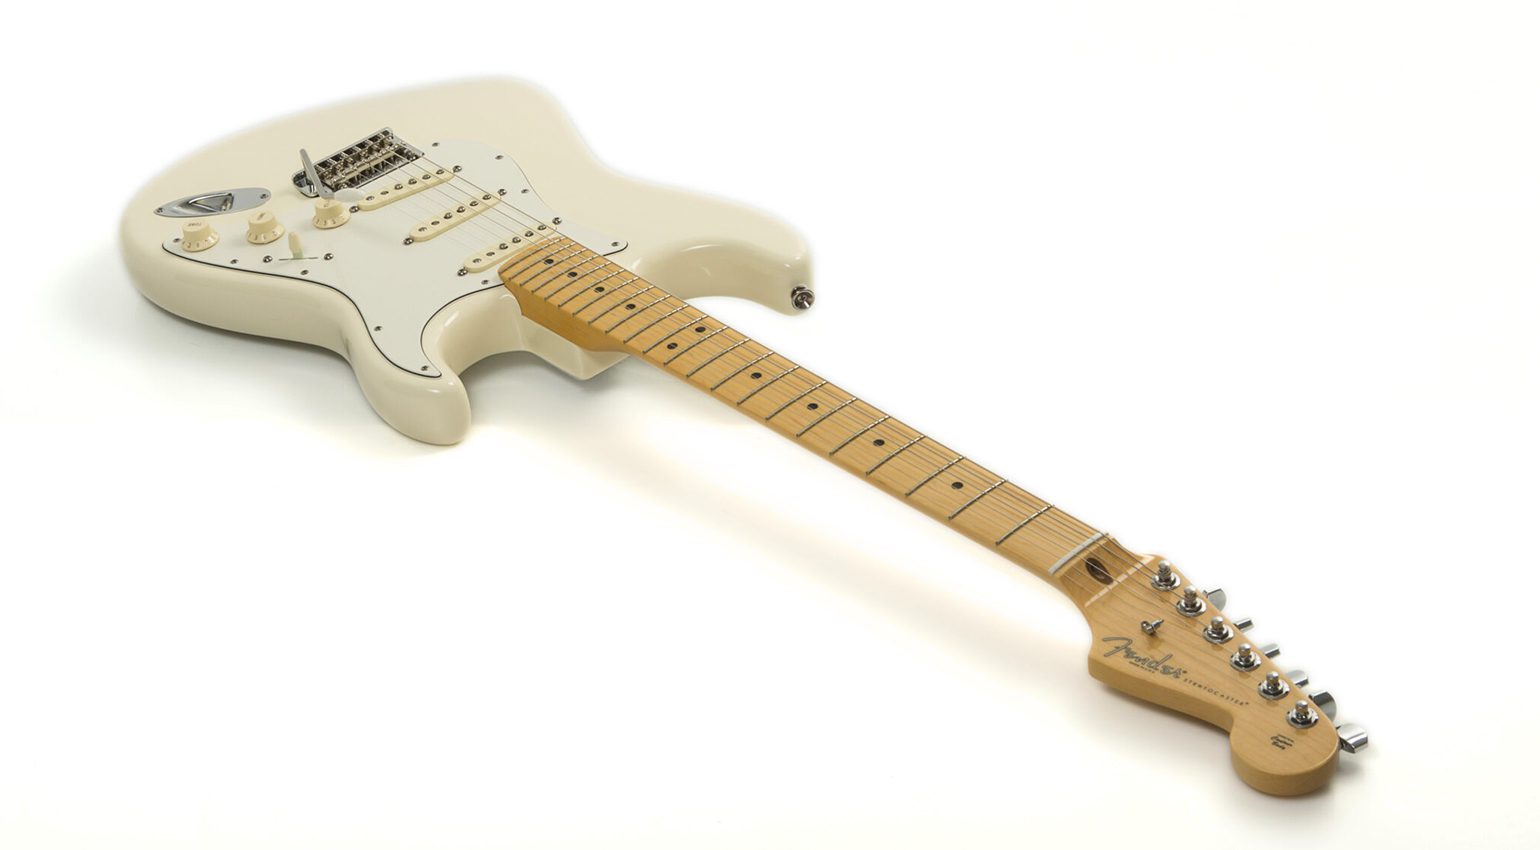 Fender Stratocaster Electric Guitar for Beginners